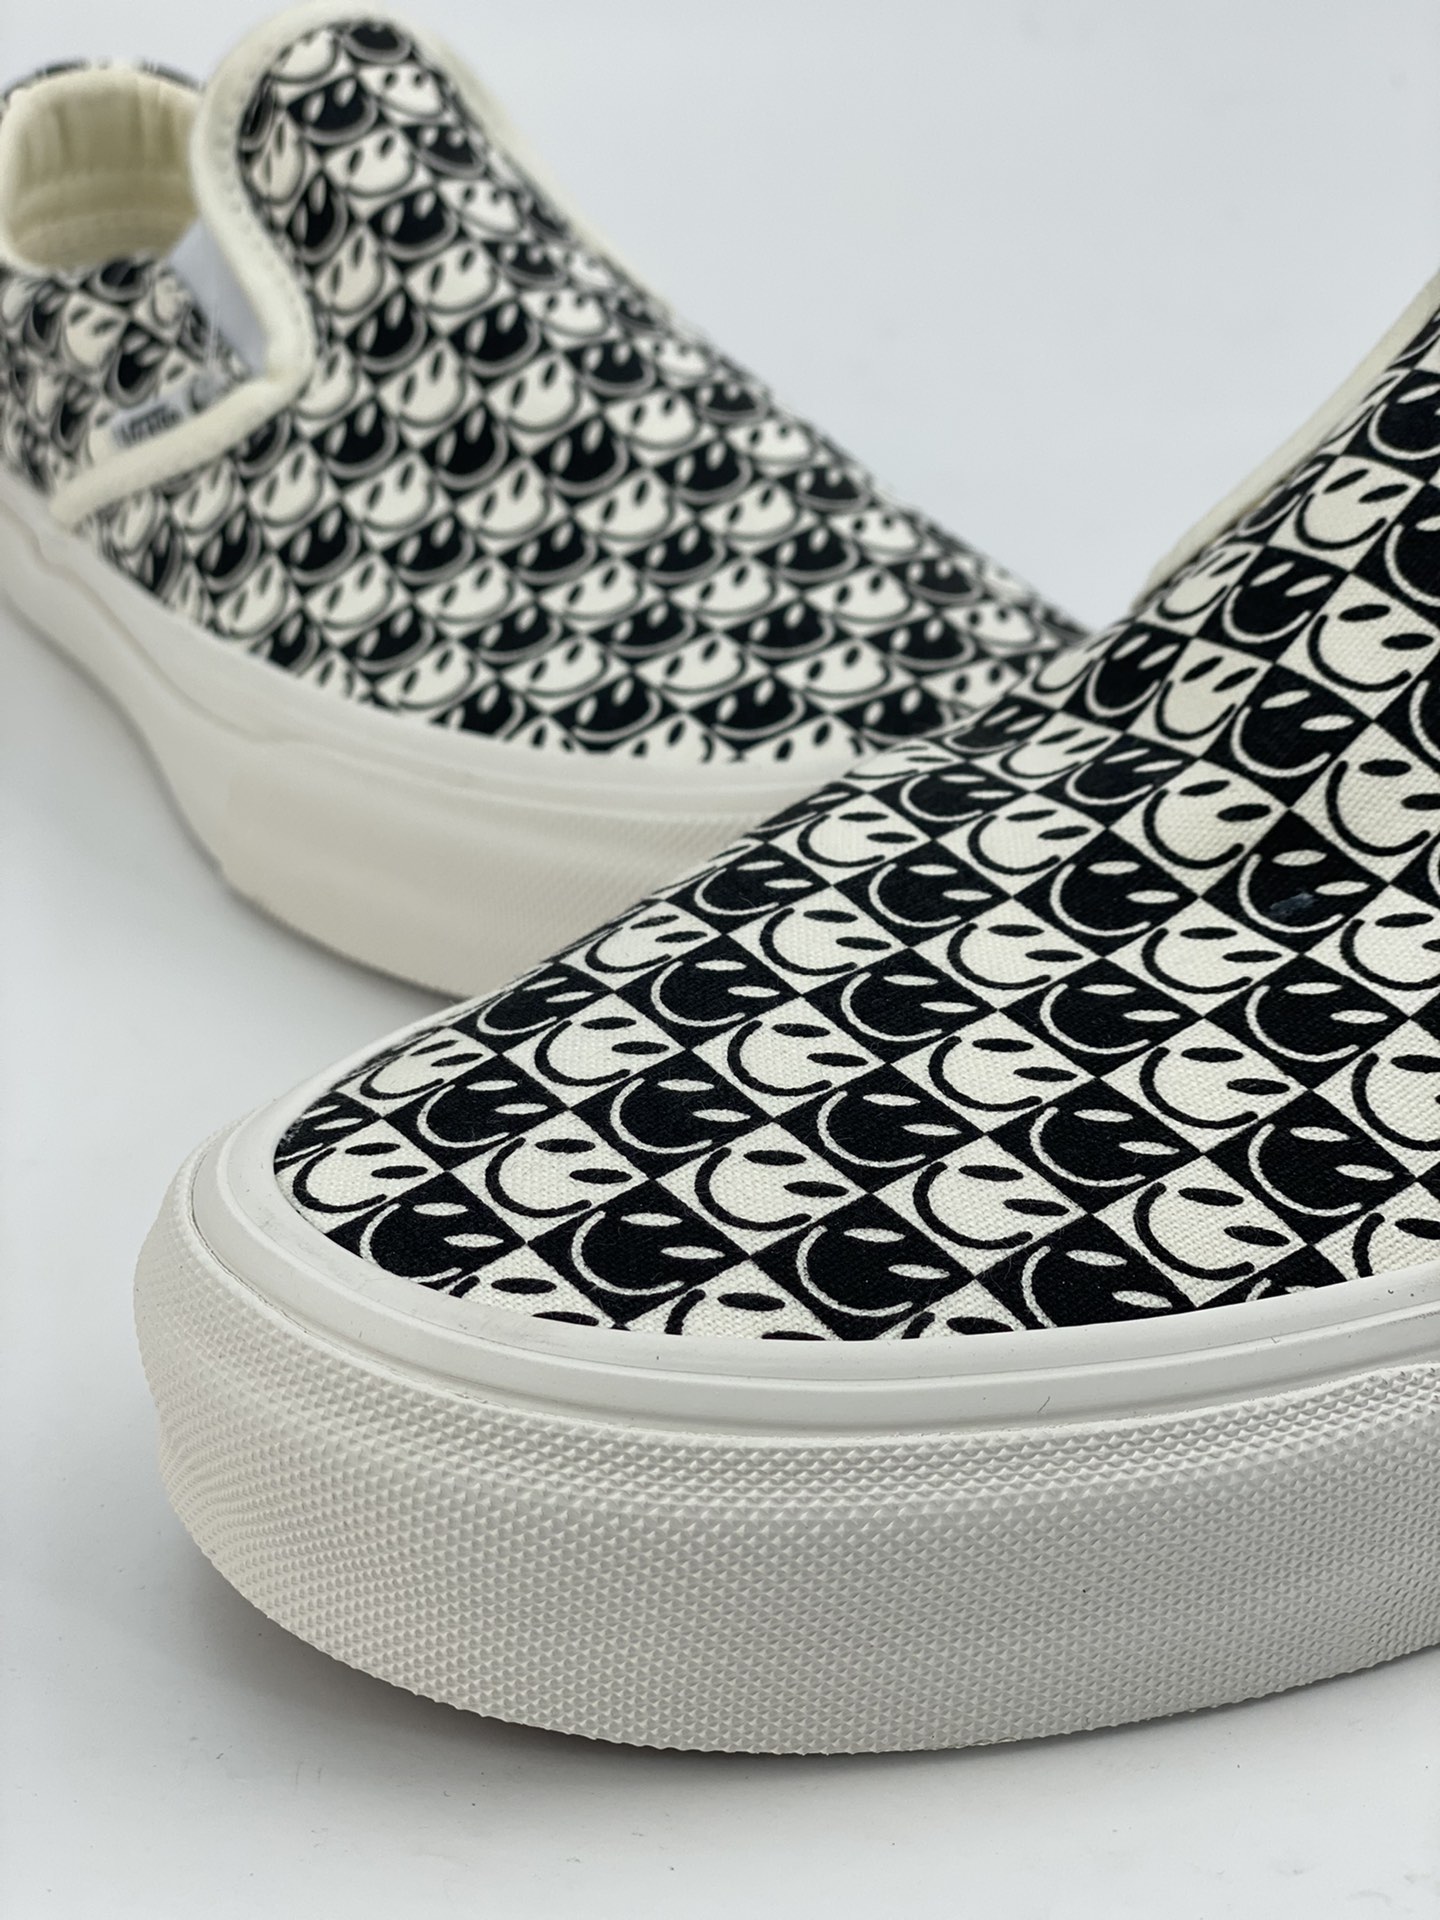 Vans Vans official Classics Slip-On VR3 smiley face one-step checkerboard print canvas shoes VN0007NCKIG